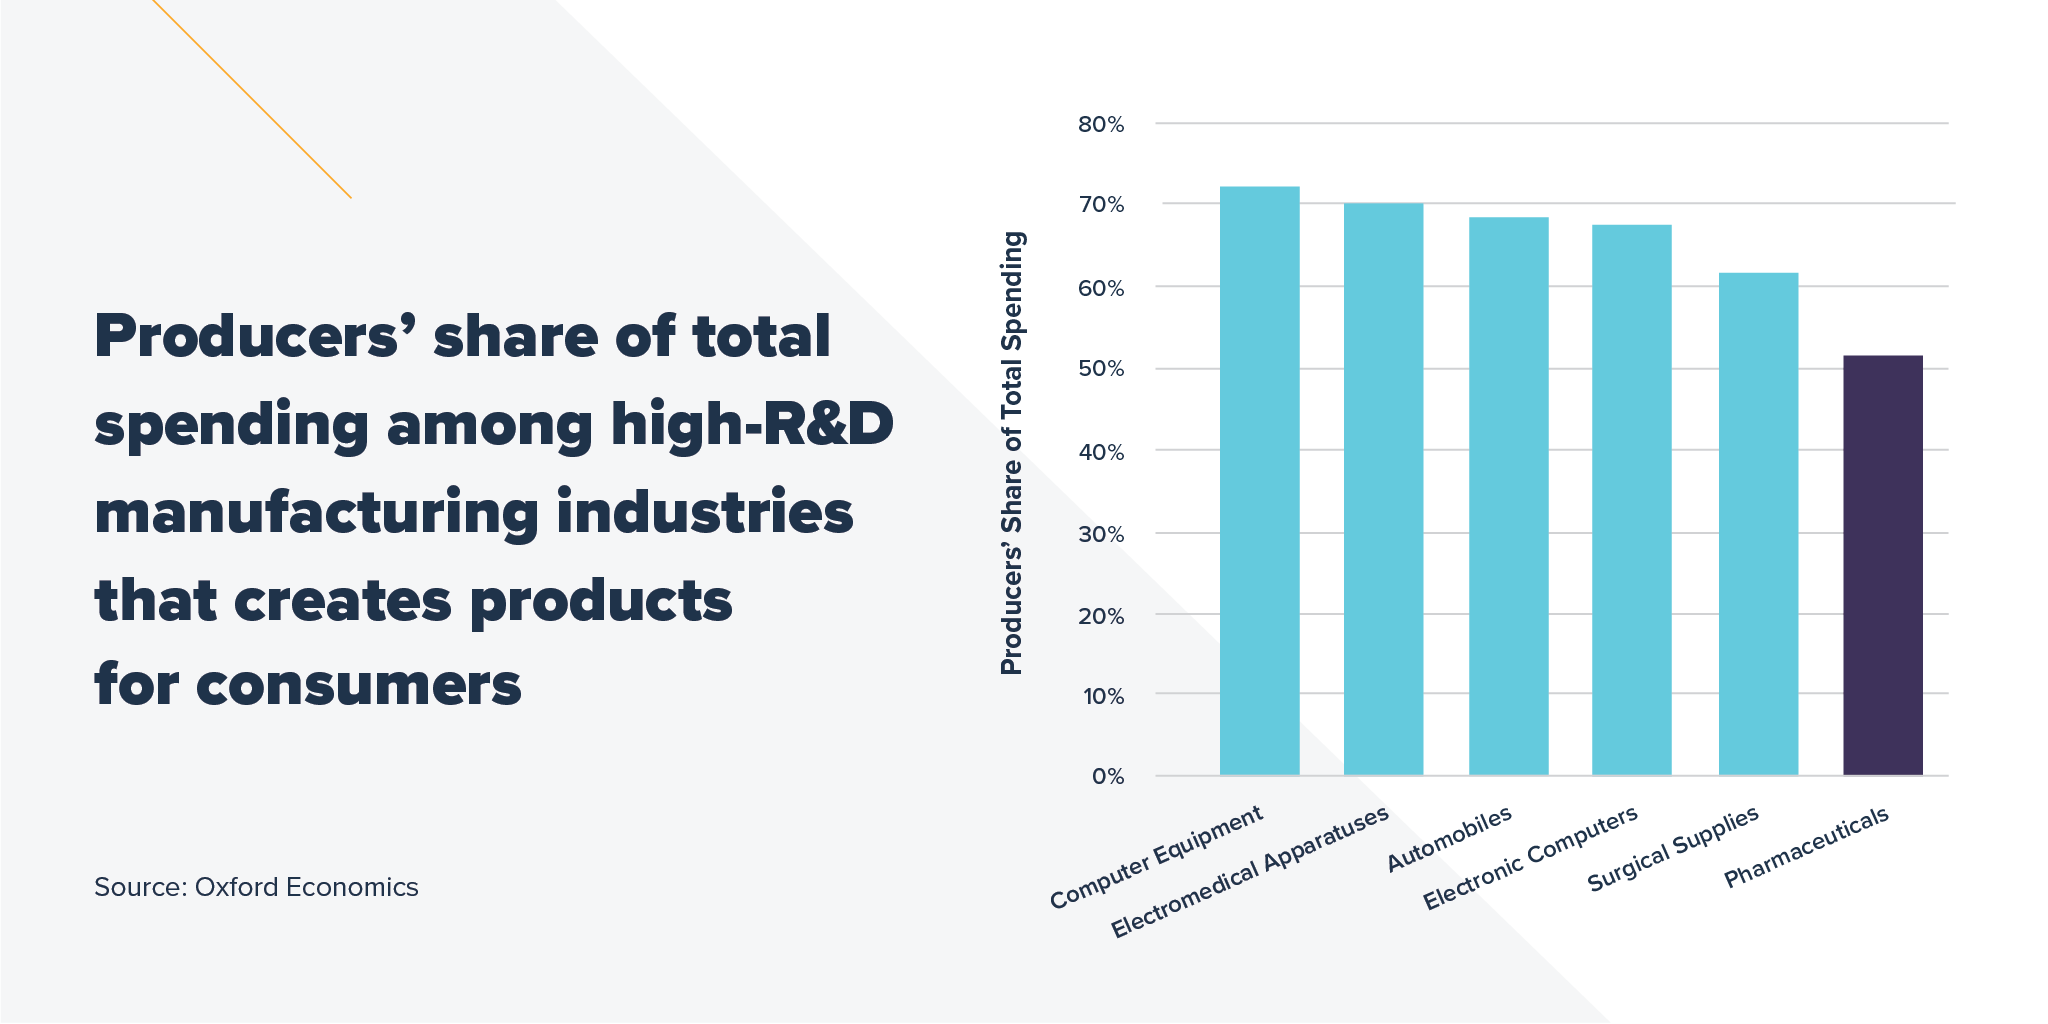 Producers’ share of total spending among high-R&D manufacturing industries that creates products for consumers